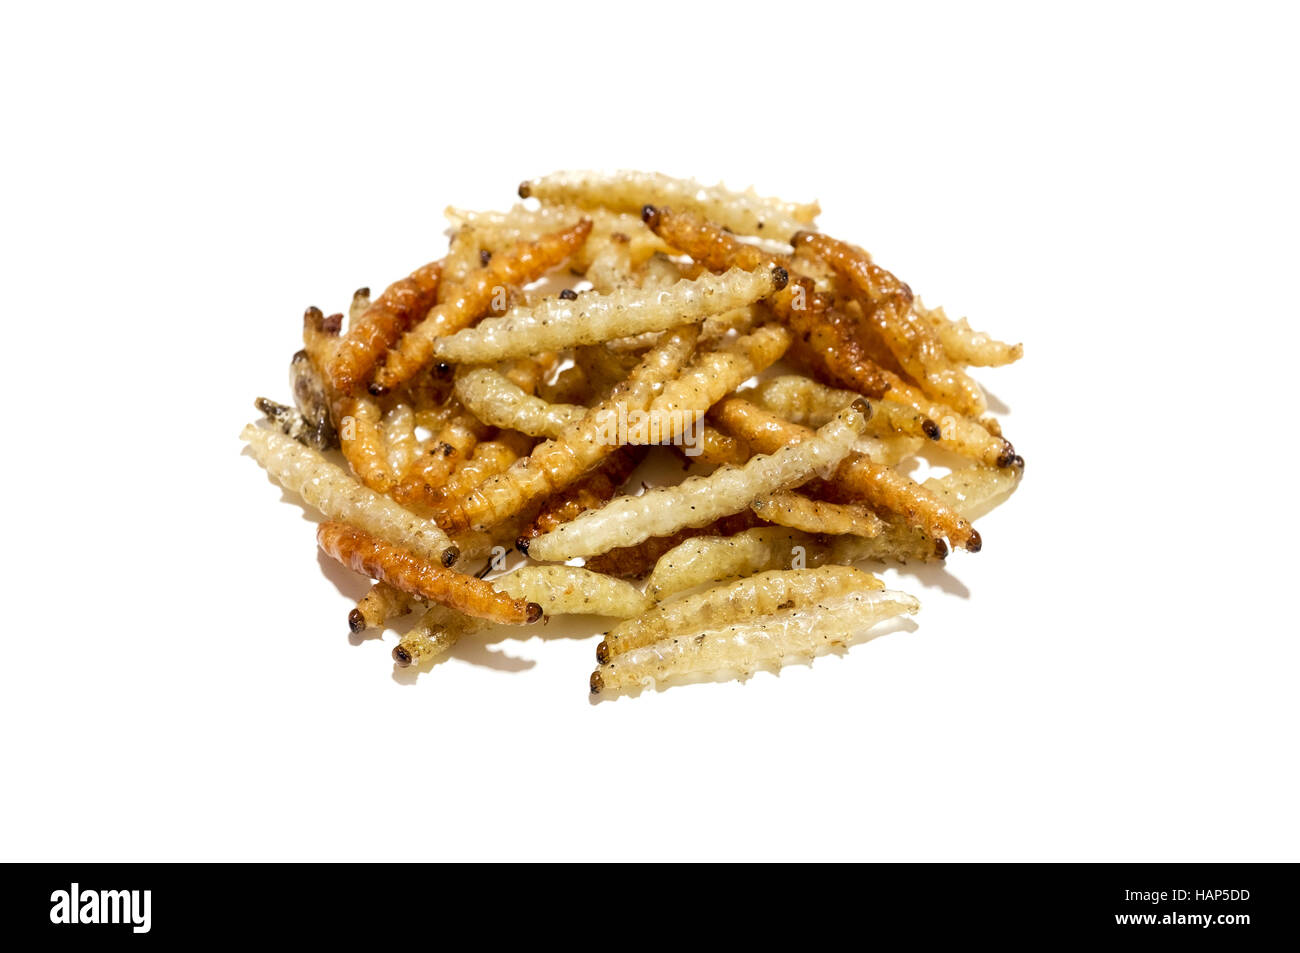 Fried caterpillars on a white background Stock Photo